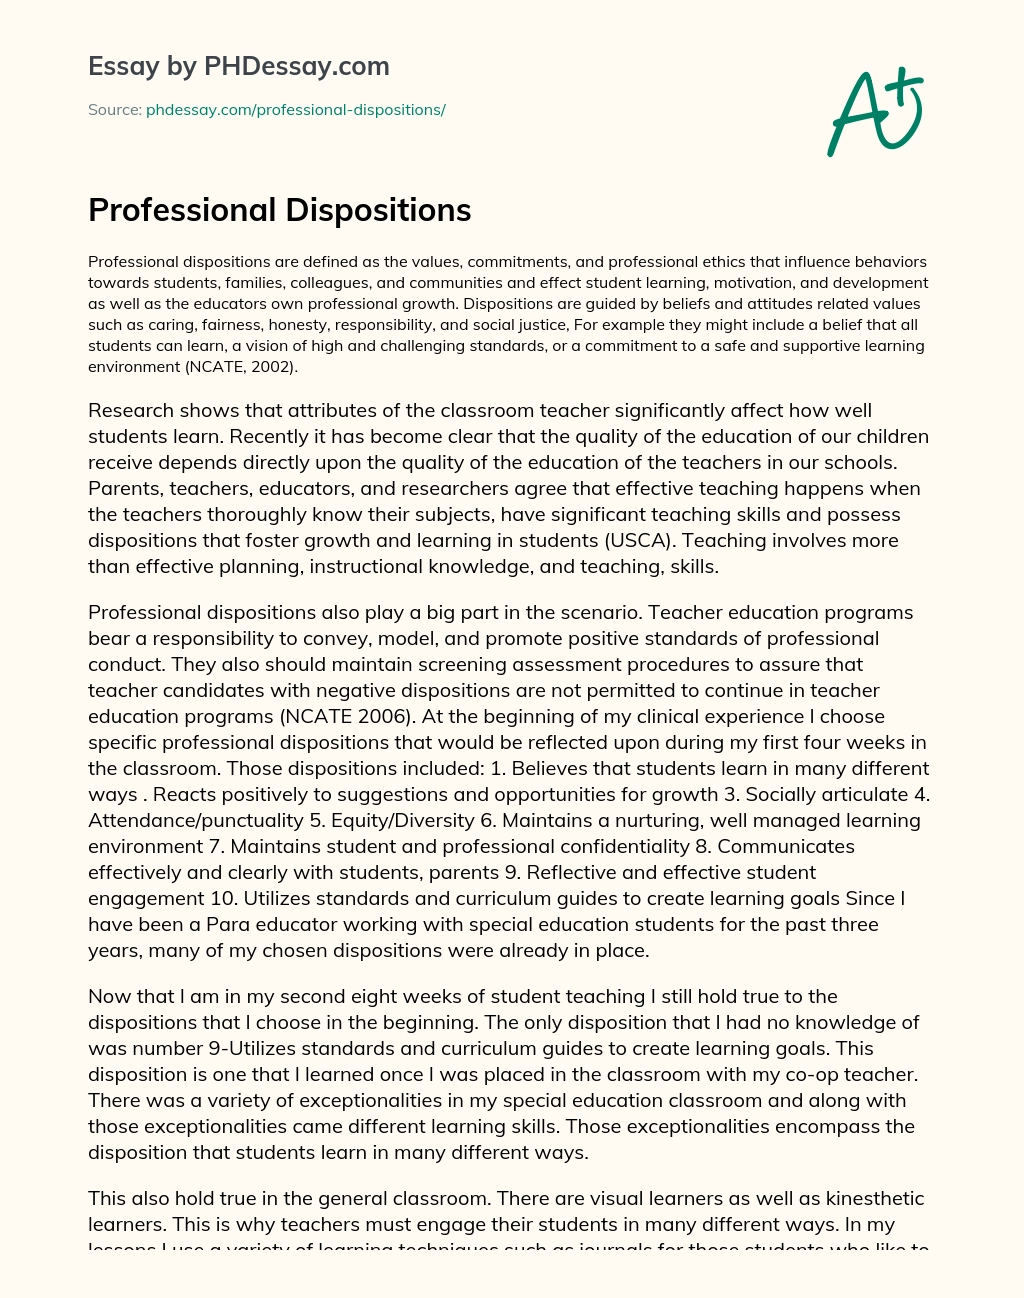 Professional Dispositions essay